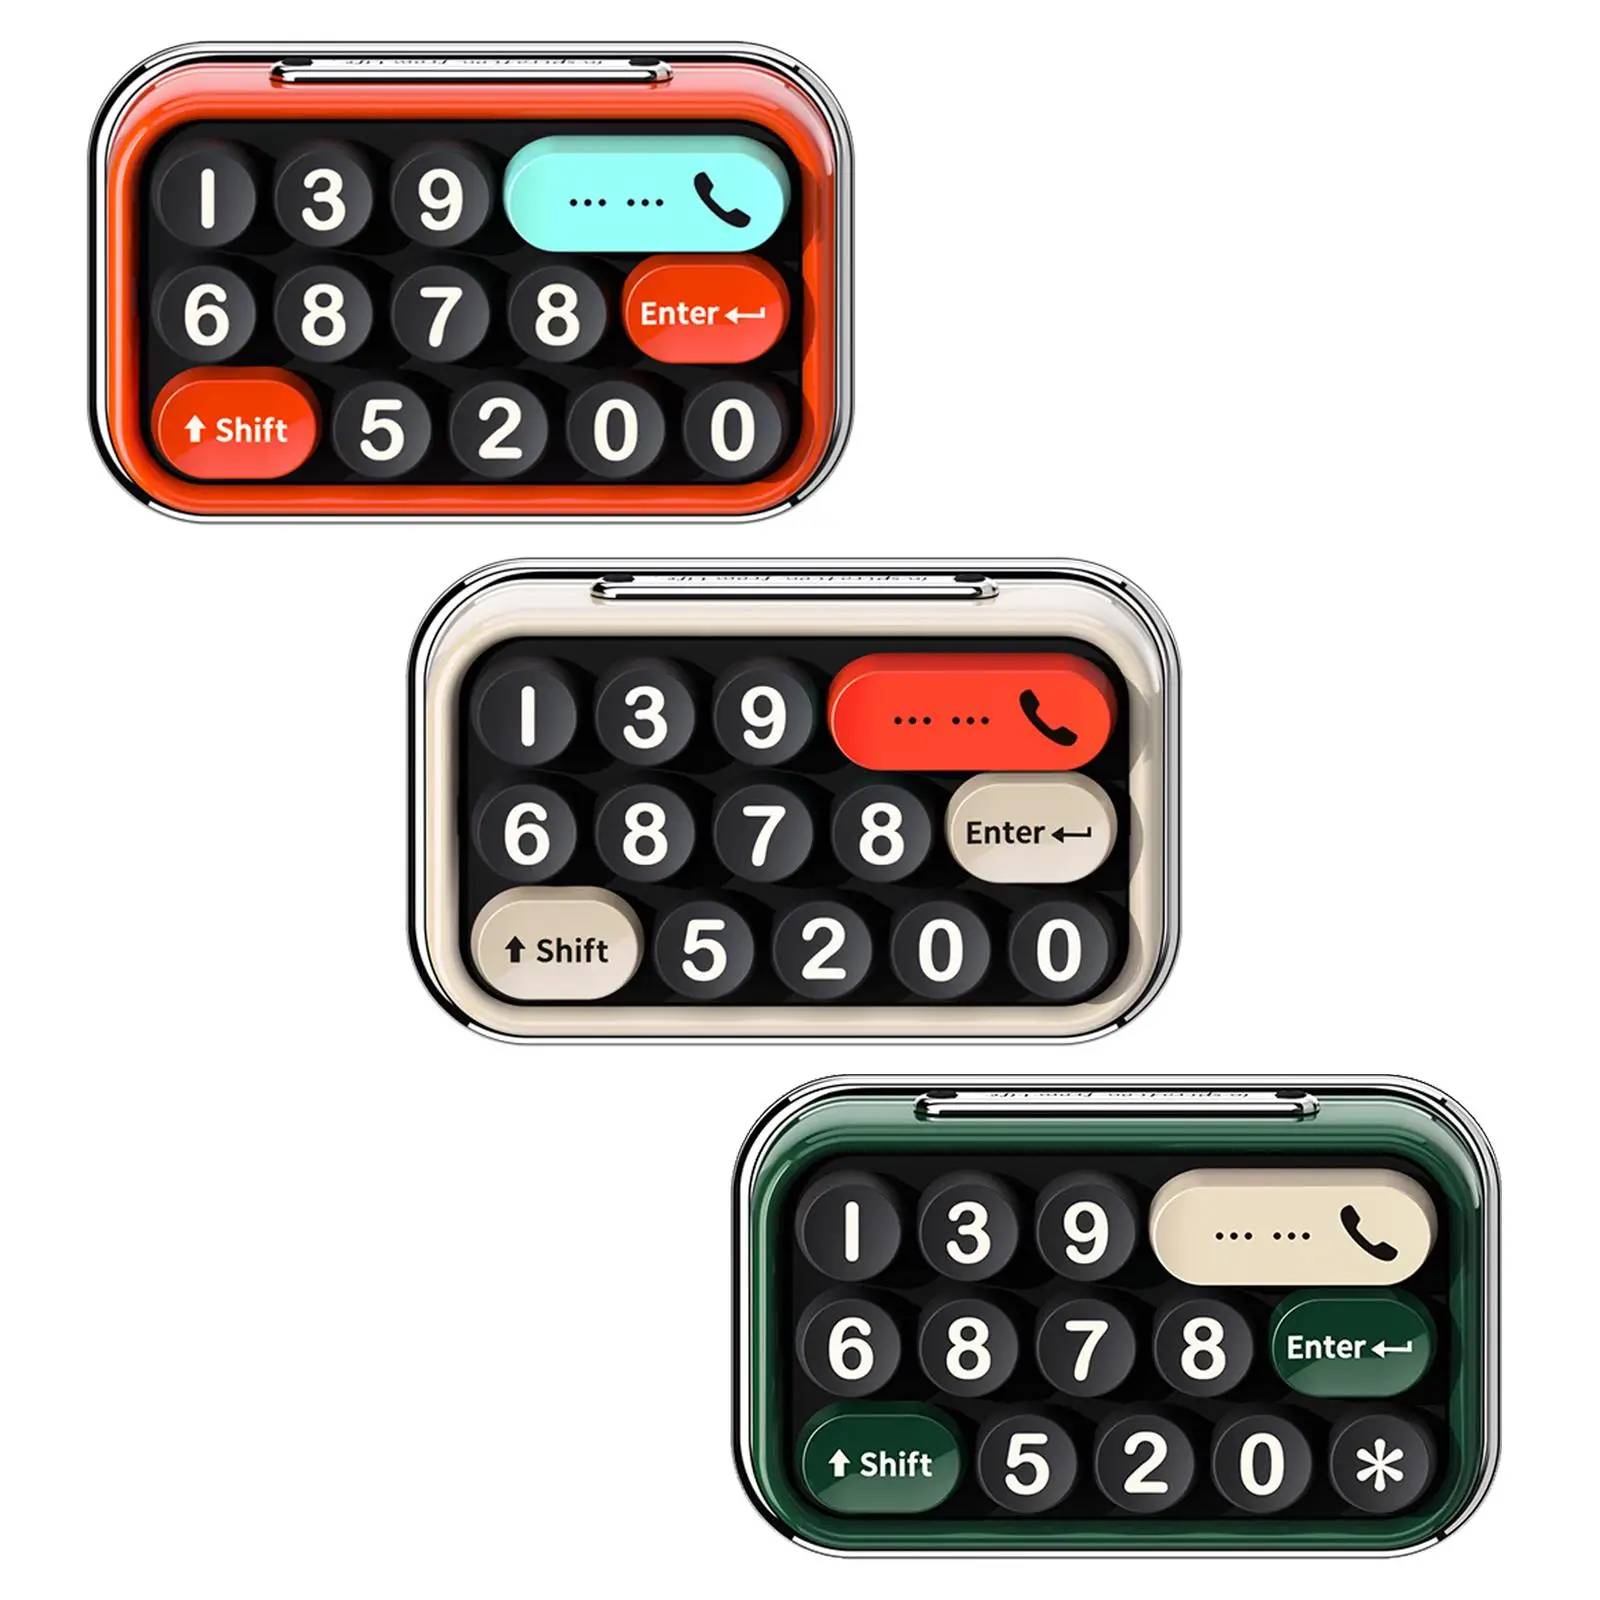 Temporary Parking Number Plate Mechanical Keyboard Shape Compact Unique Notification Phone Number Card for Cars Dashboard